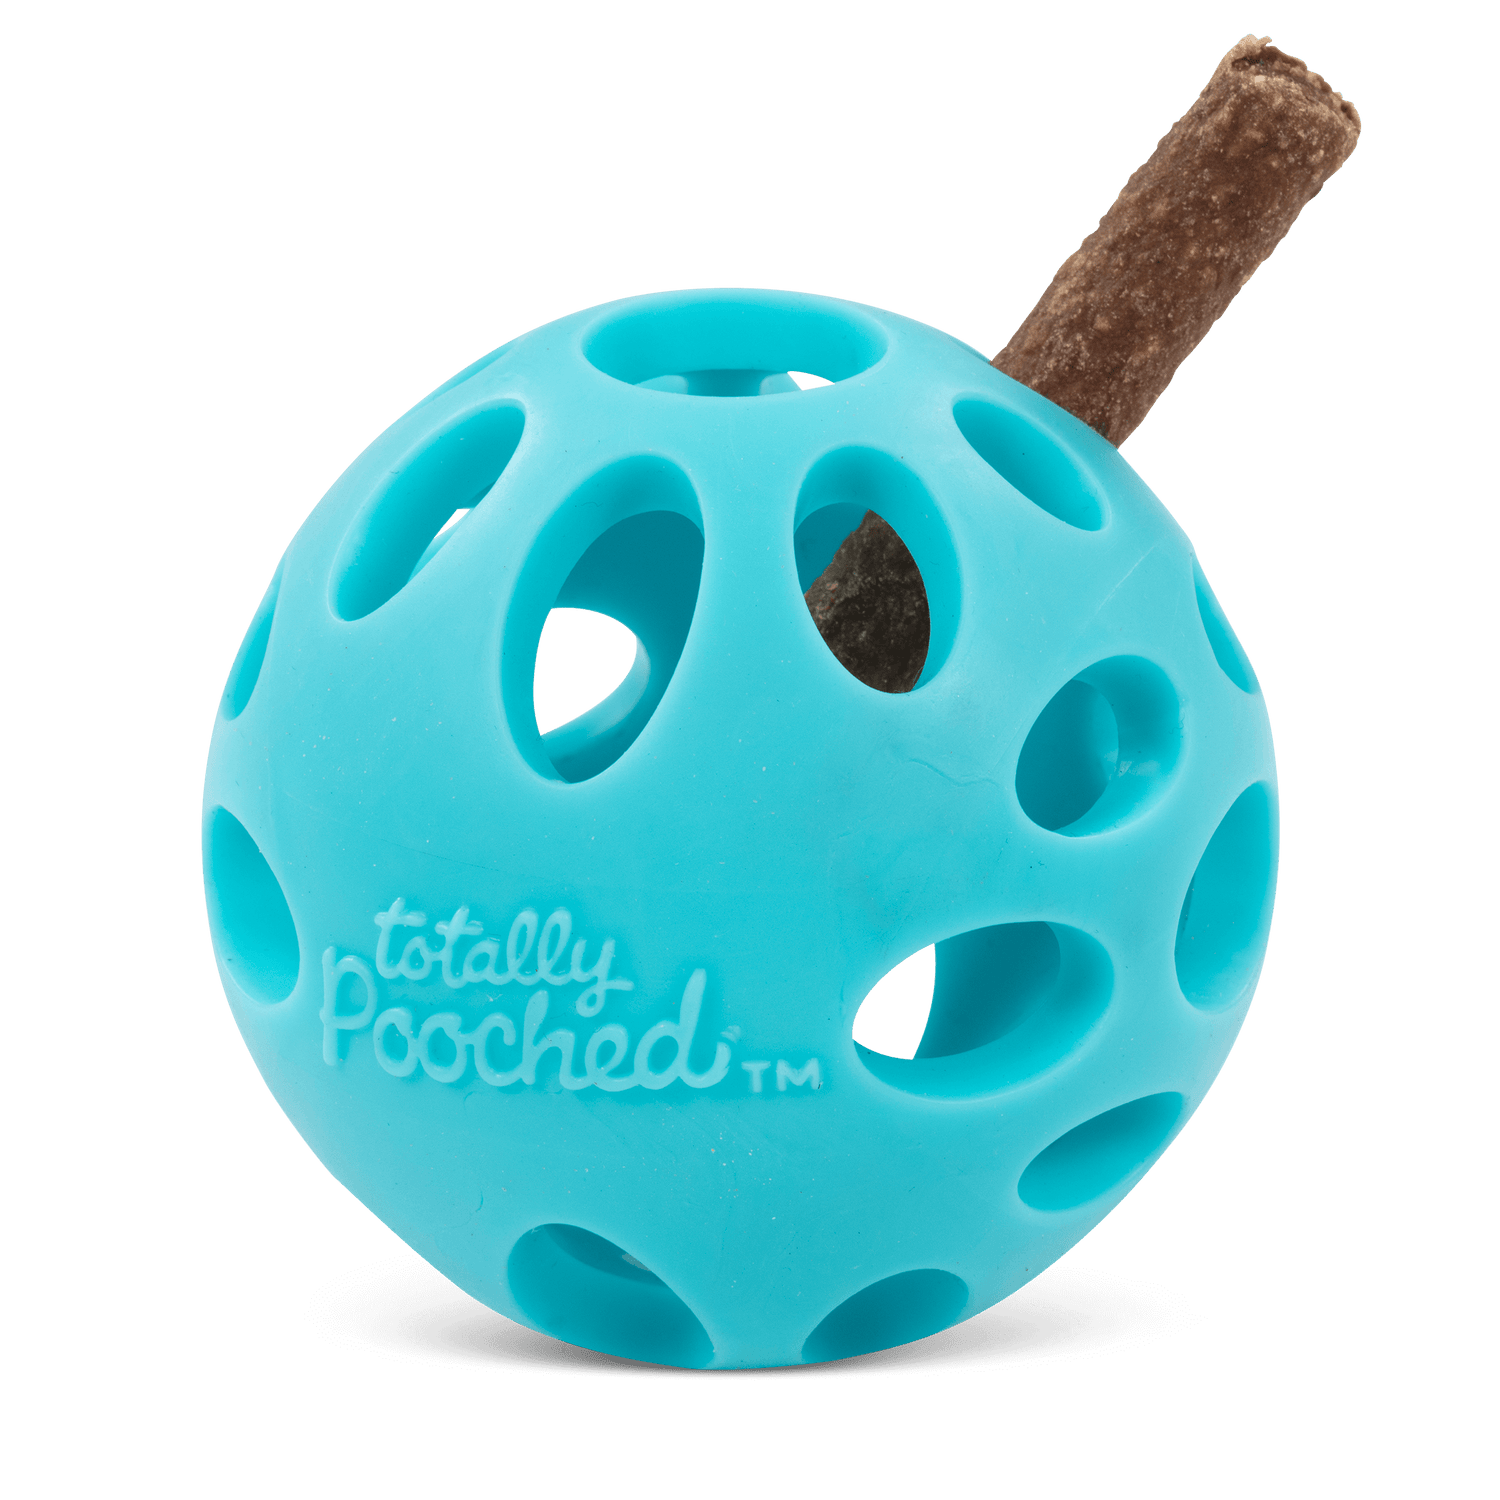 Durable dog ball for rough play.  Toxic free dog toys.